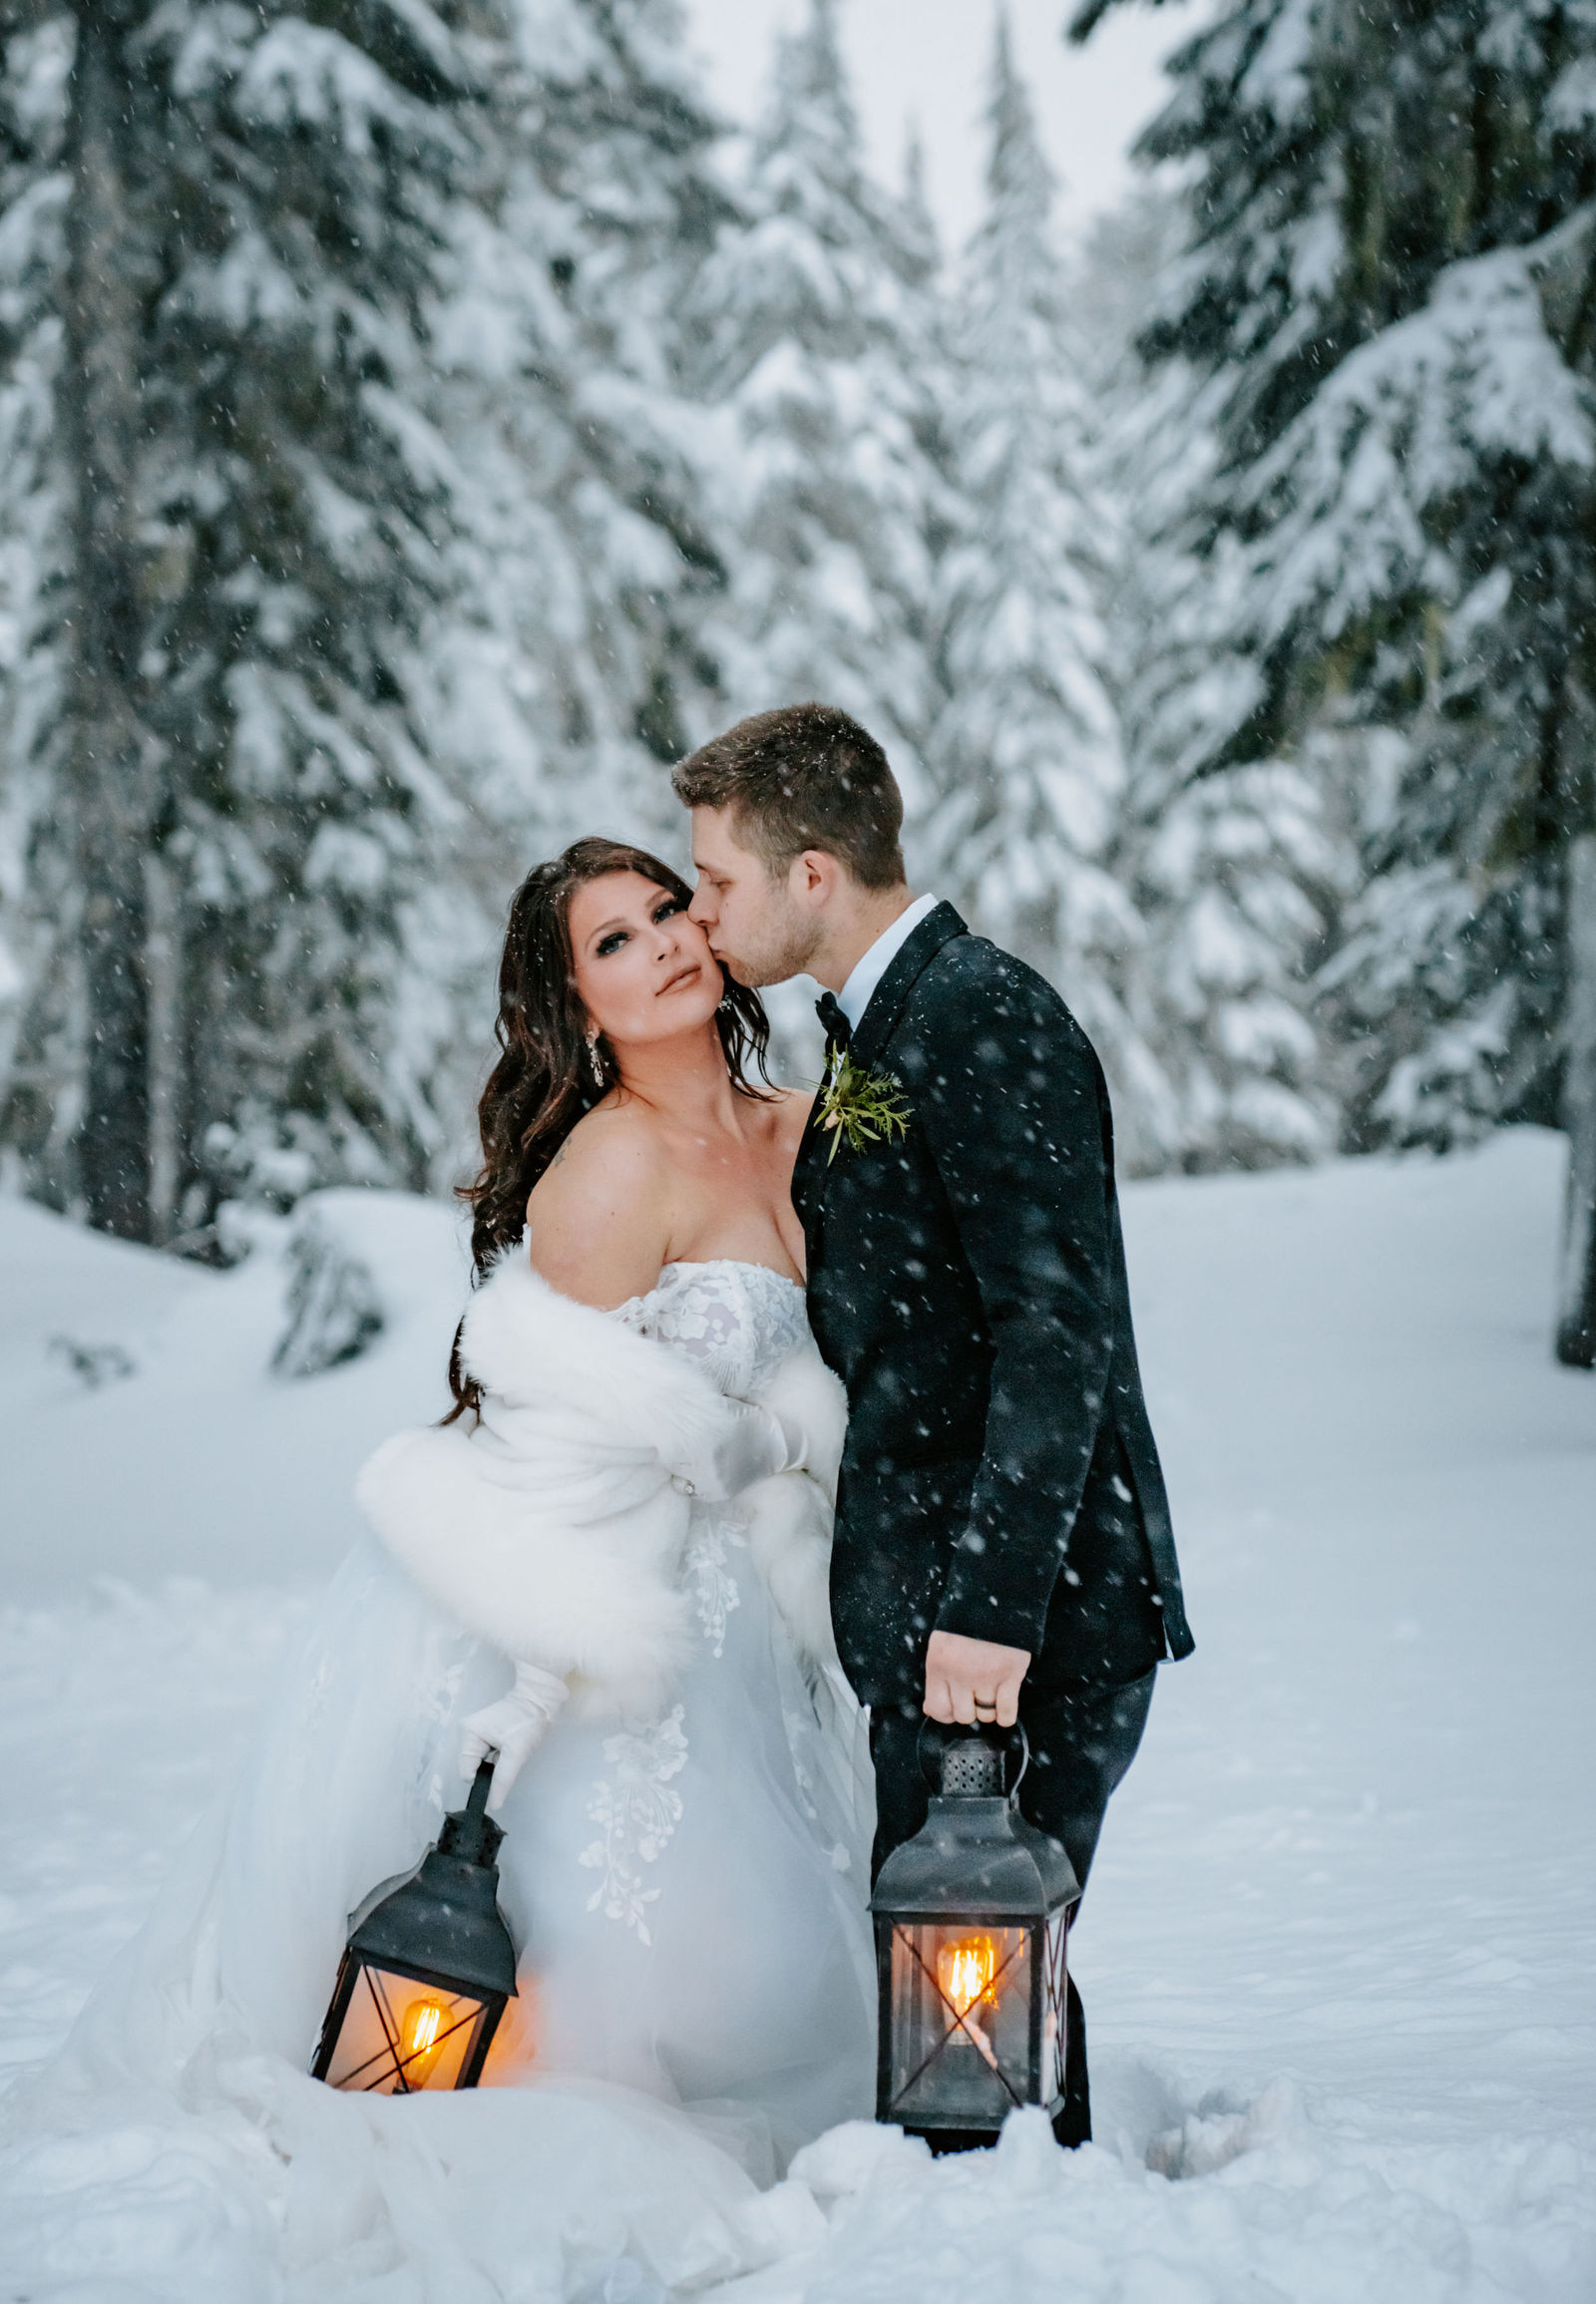 Groom kissing bride's cheek while they hold lanterns in a snowstorm during a winter elopement on Mt. Hood in Oregon.